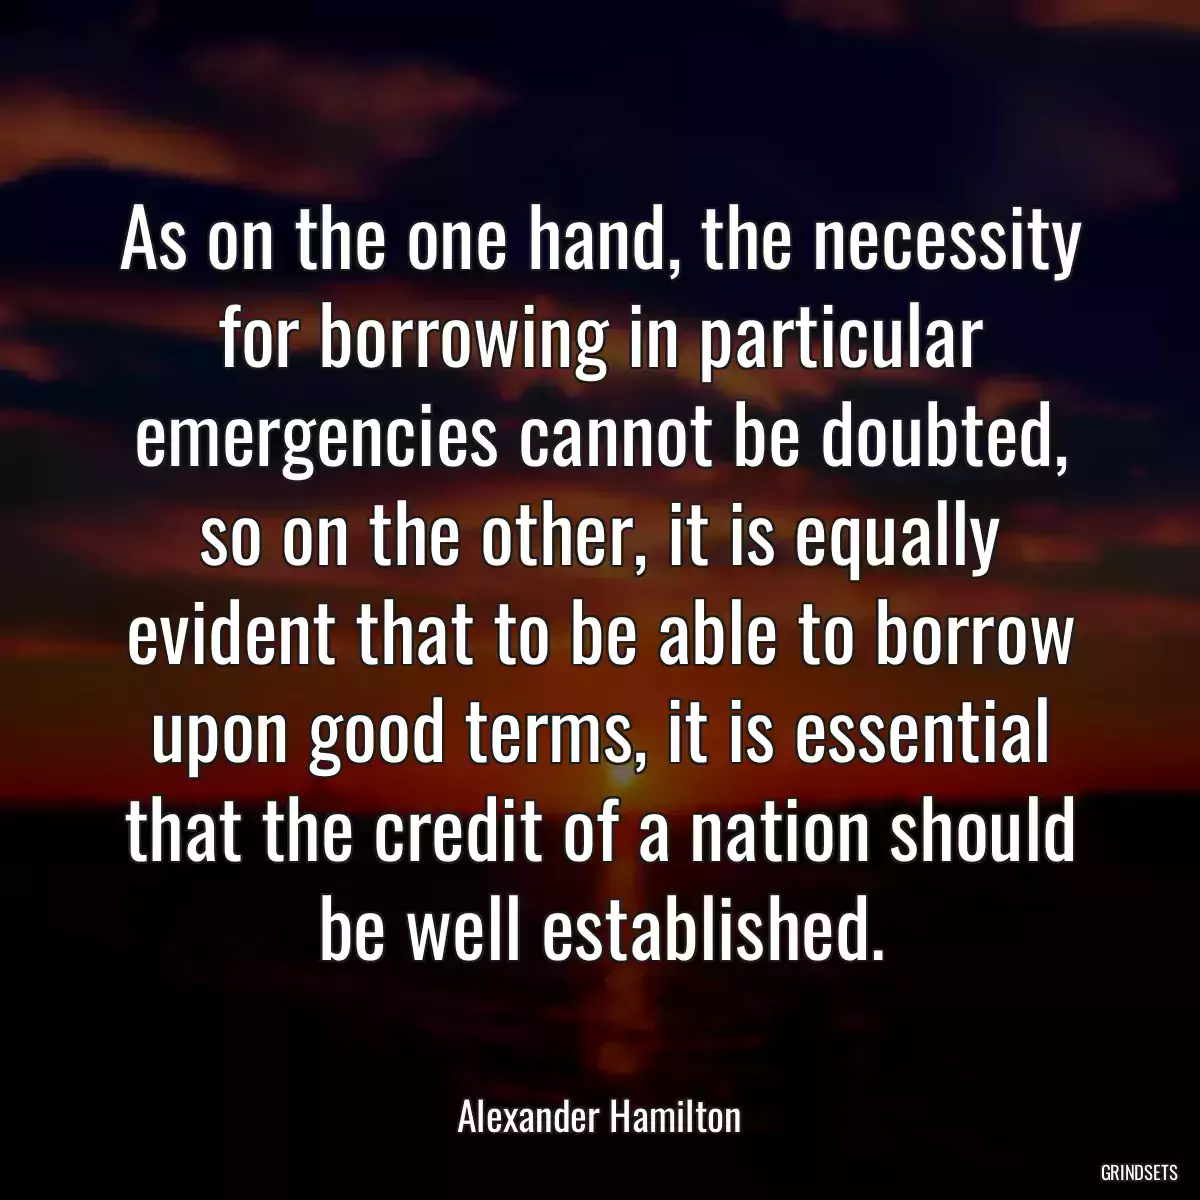 As on the one hand, the necessity for borrowing in particular emergencies cannot be doubted, so on the other, it is equally evident that to be able to borrow upon good terms, it is essential that the credit of a nation should be well established.